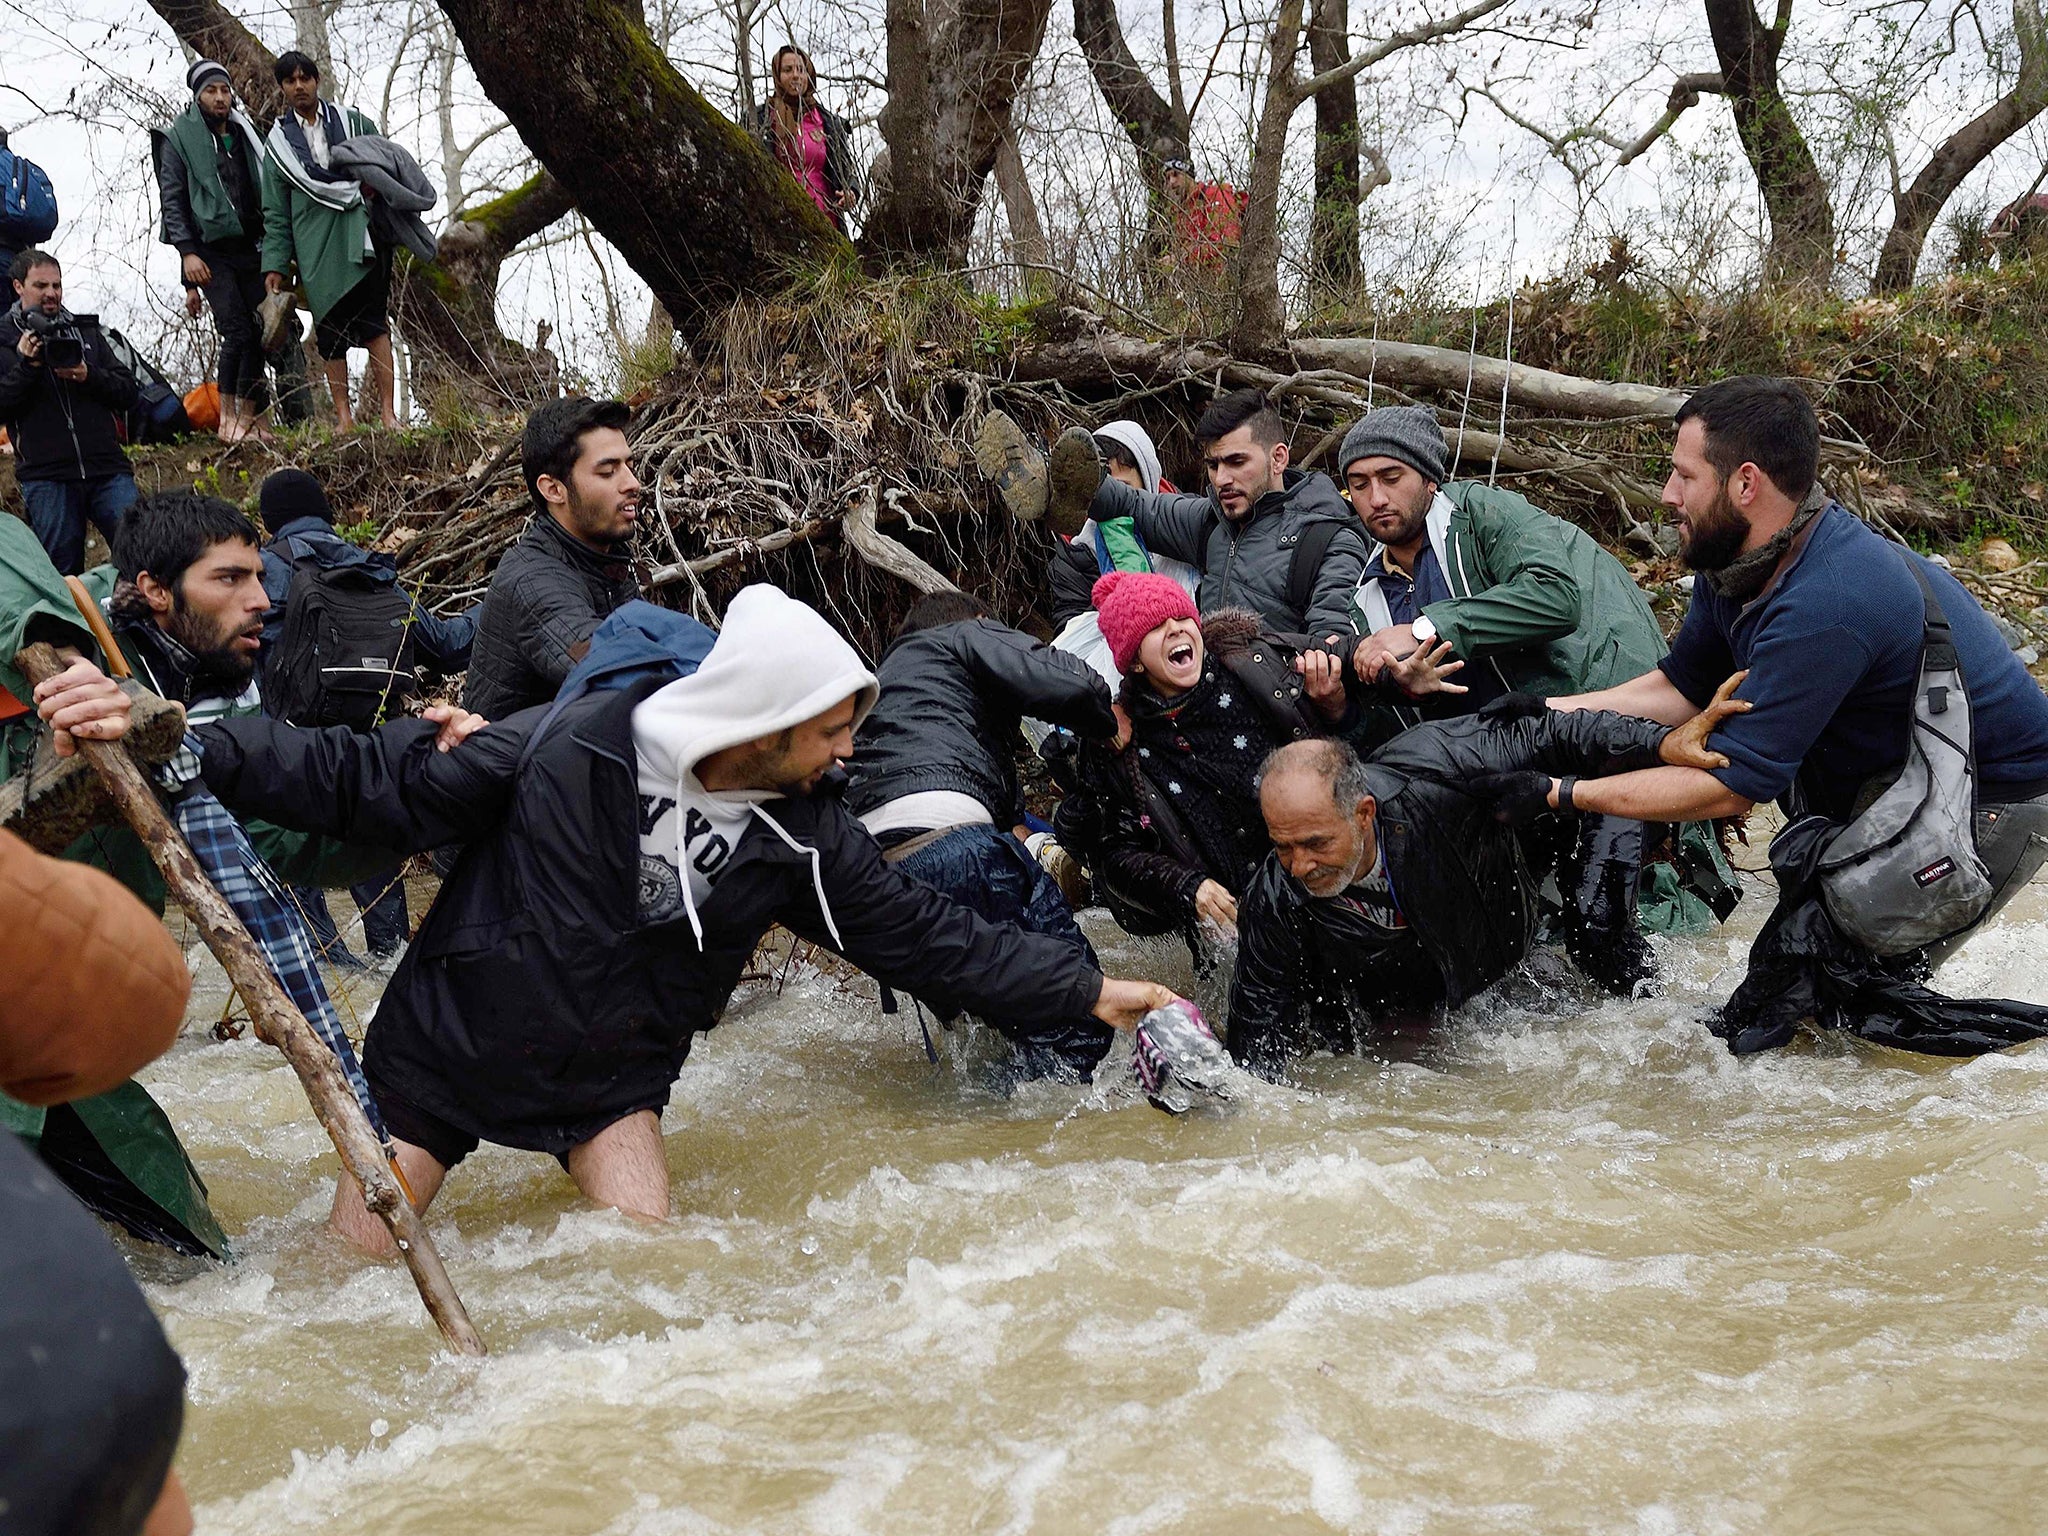 A refugee family falls into a river they try cross on their way to Macedonia from a makeshift camp at the Greek-Macedonian border, near the Greek village of Idomeni, where thousands of refugees are stranded by the Balkan border blockade